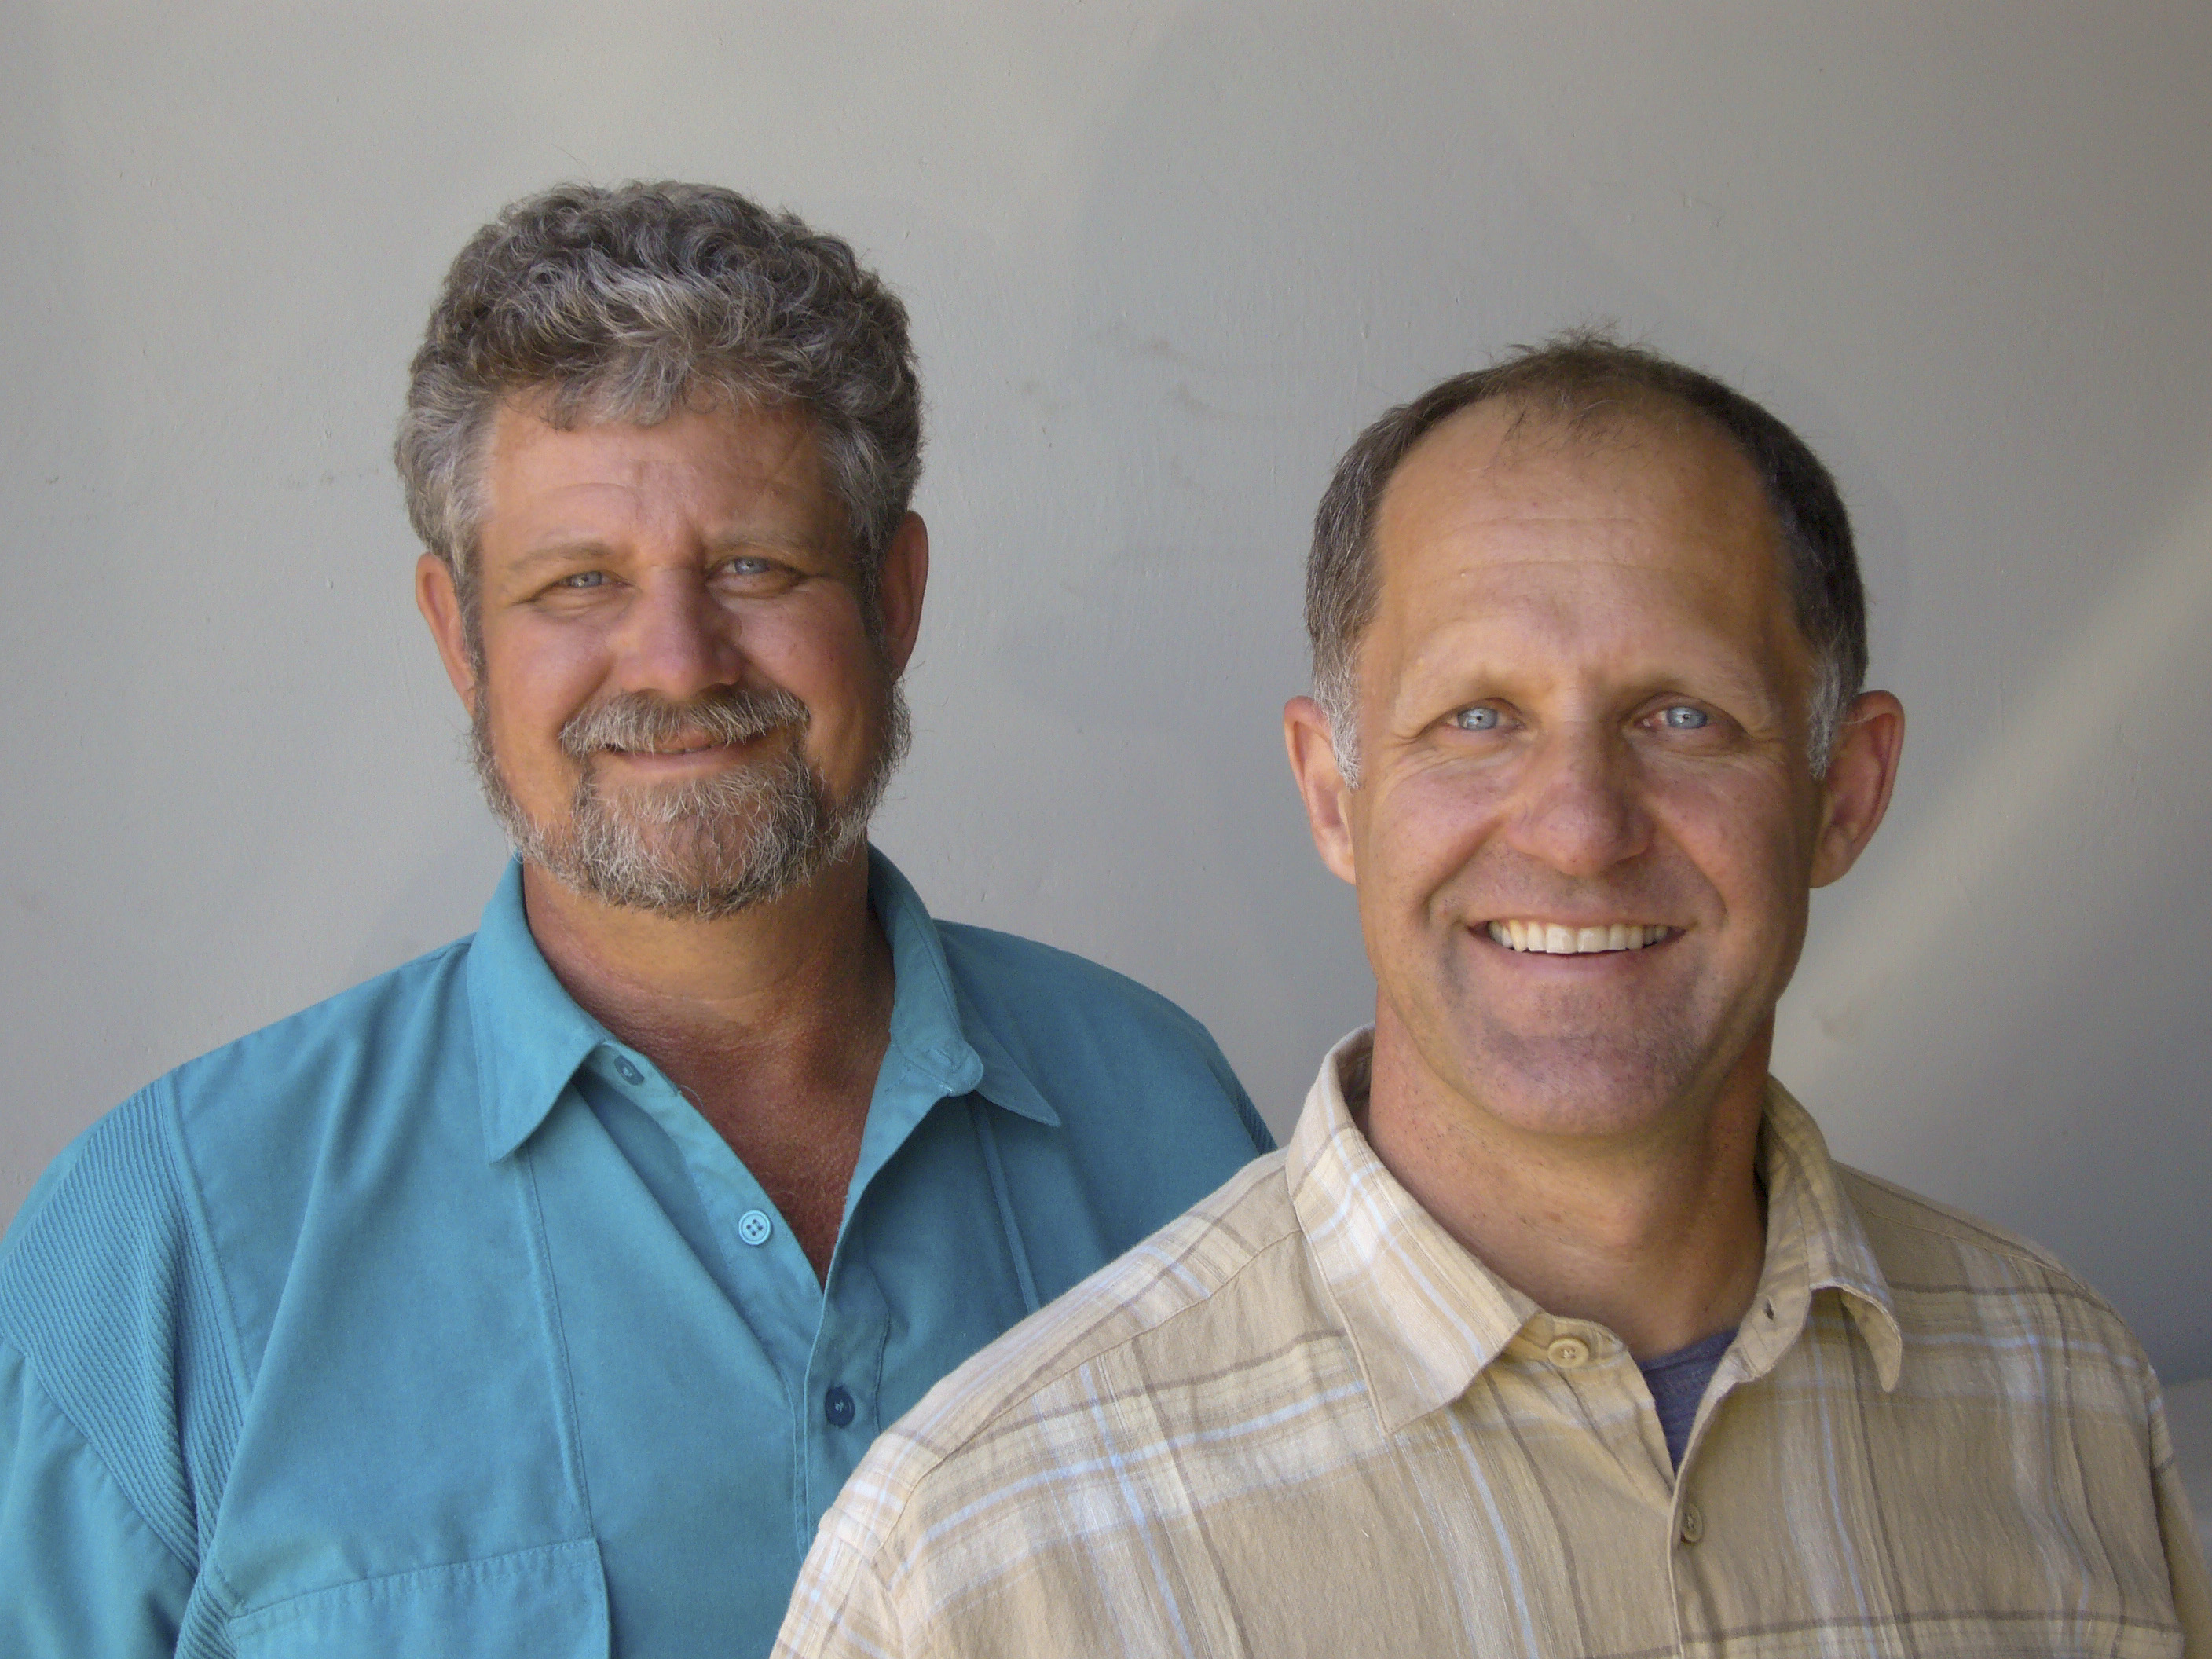 Questions? Feel free to contact Frank and Jim Gosen.